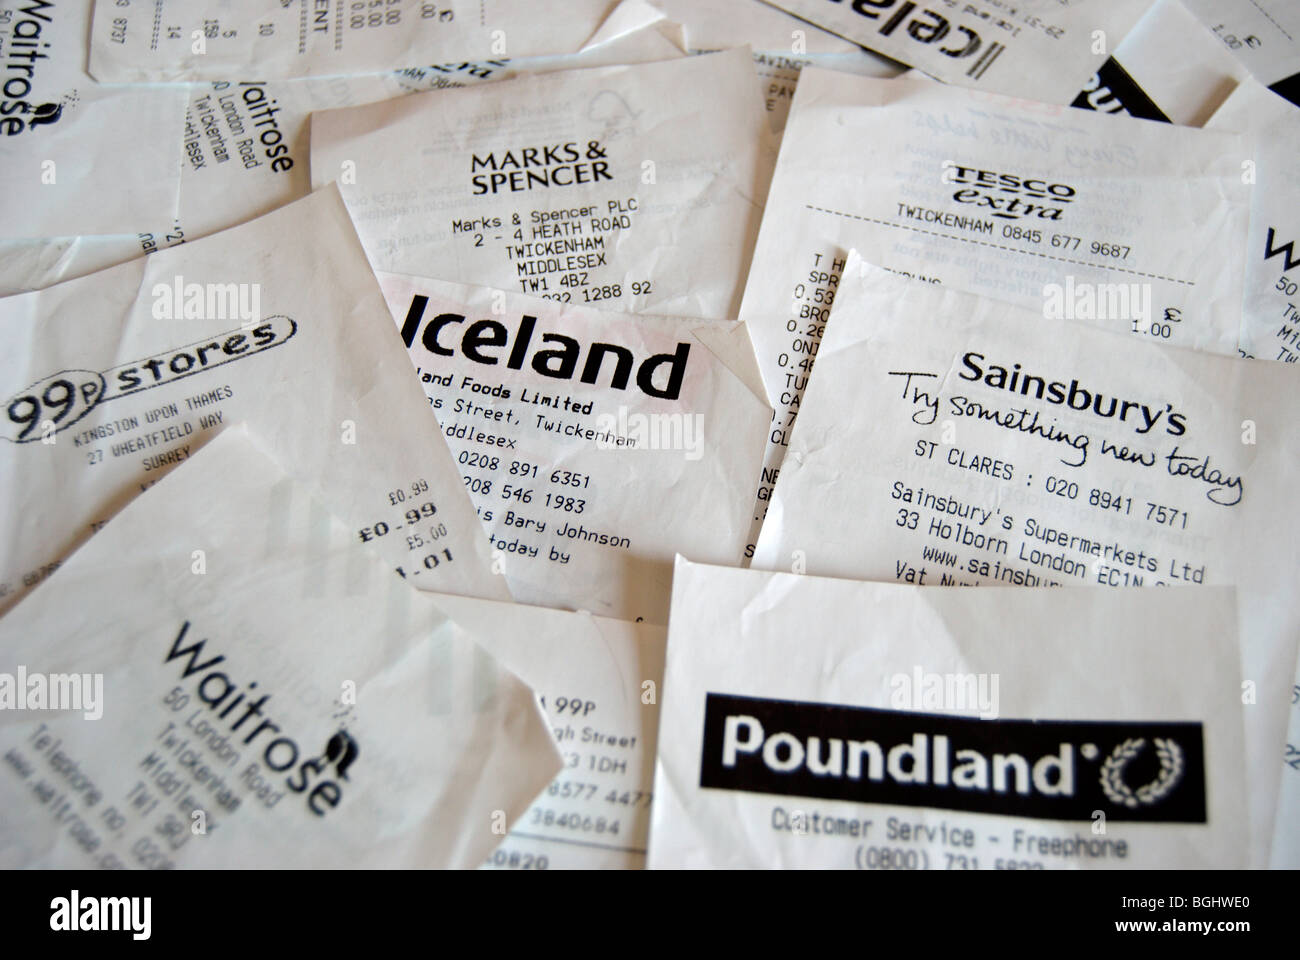 scattered till receipts from british supermarkets Stock Photo